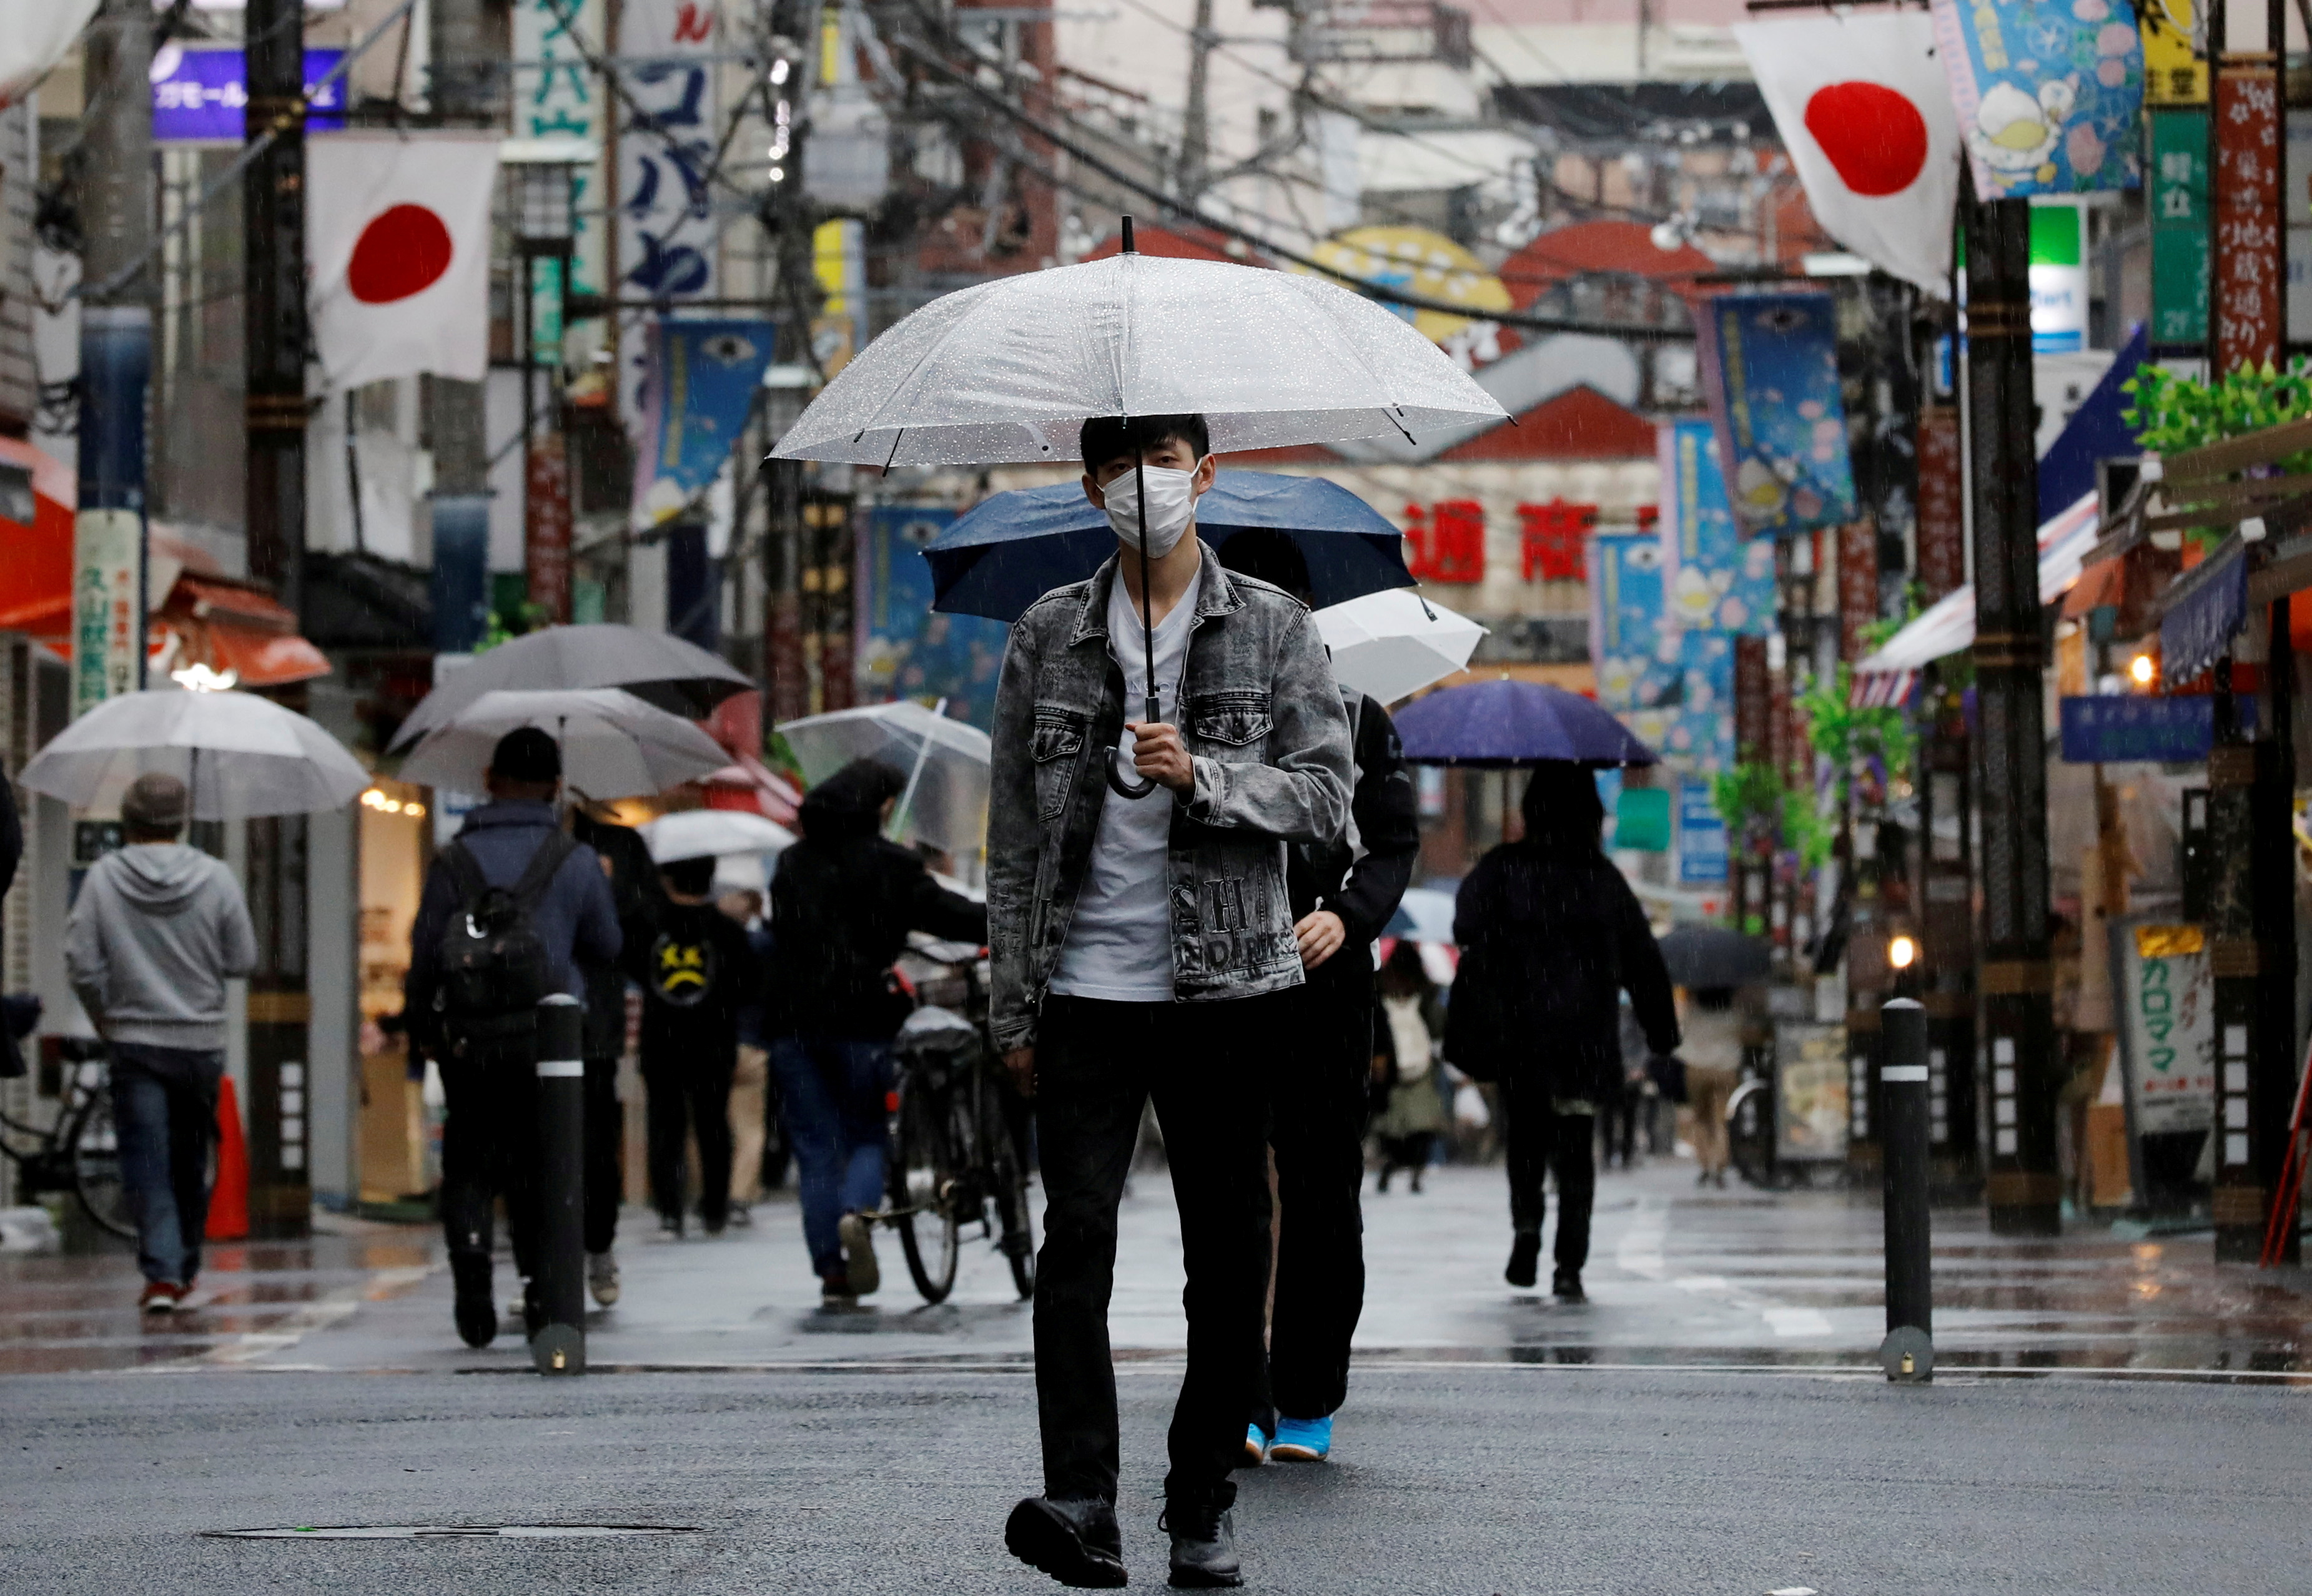 Japan's Q3 growth forecast cut as new pandemic curbs hit: Reuters poll |  Reuters